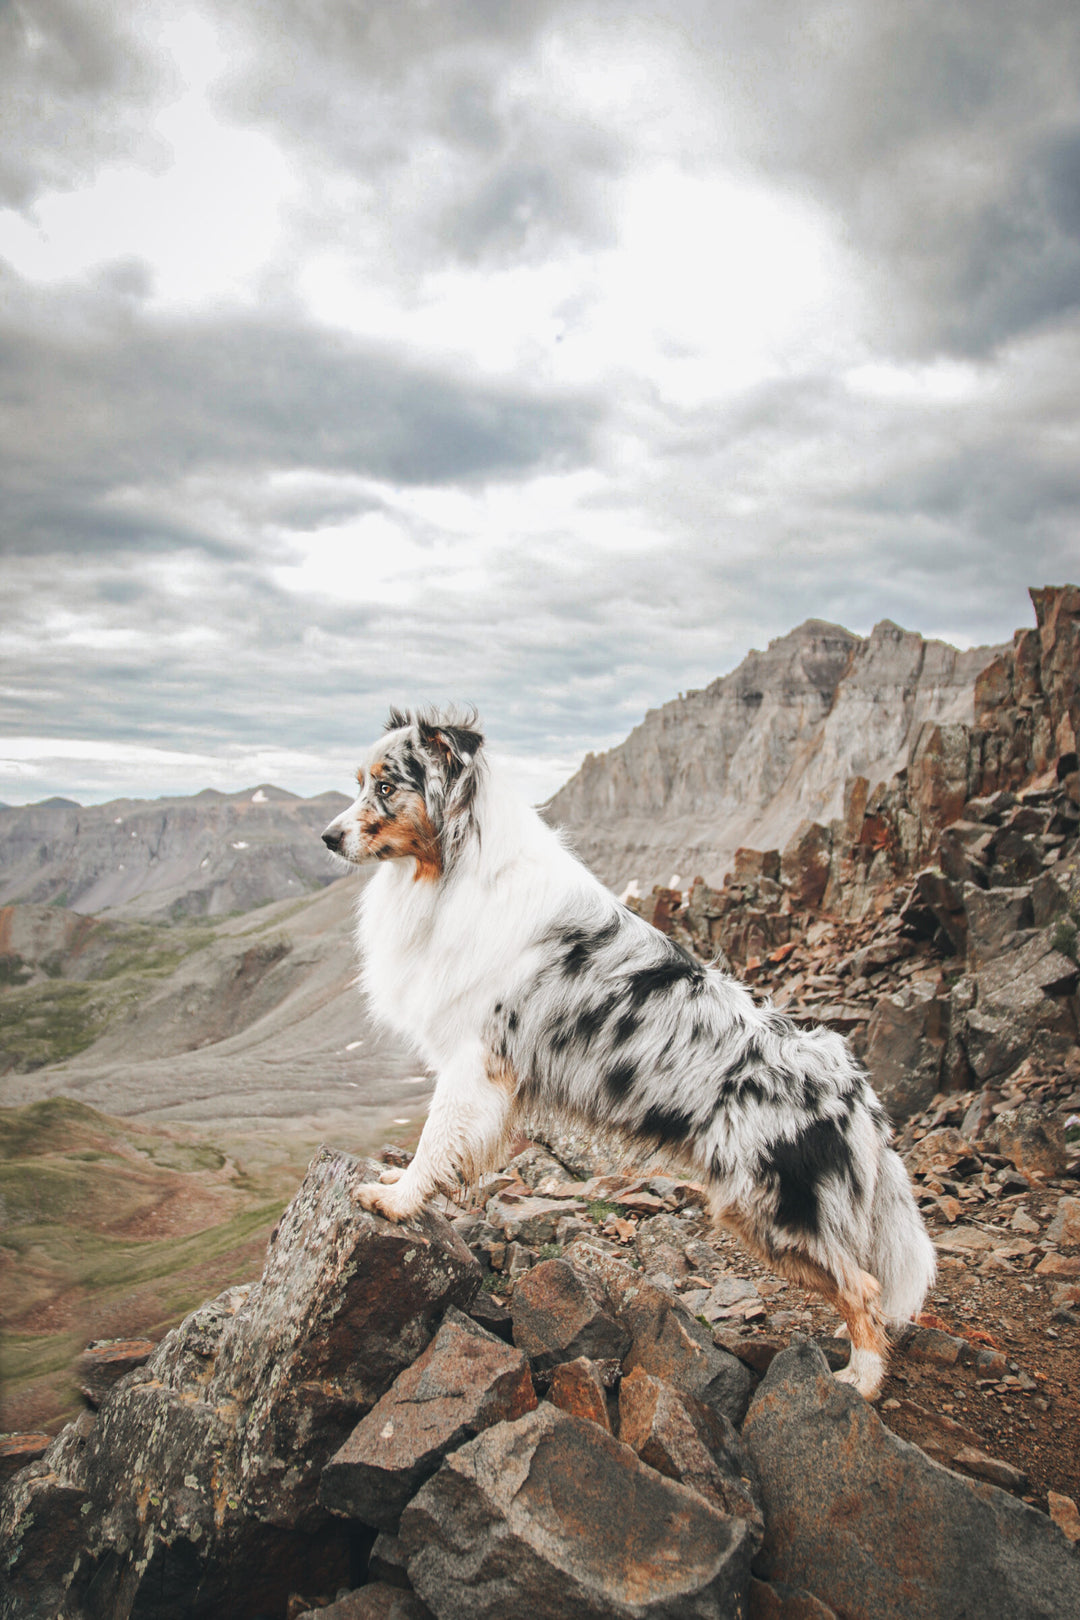 Exploring the Outdoors with Stilton the Aussie